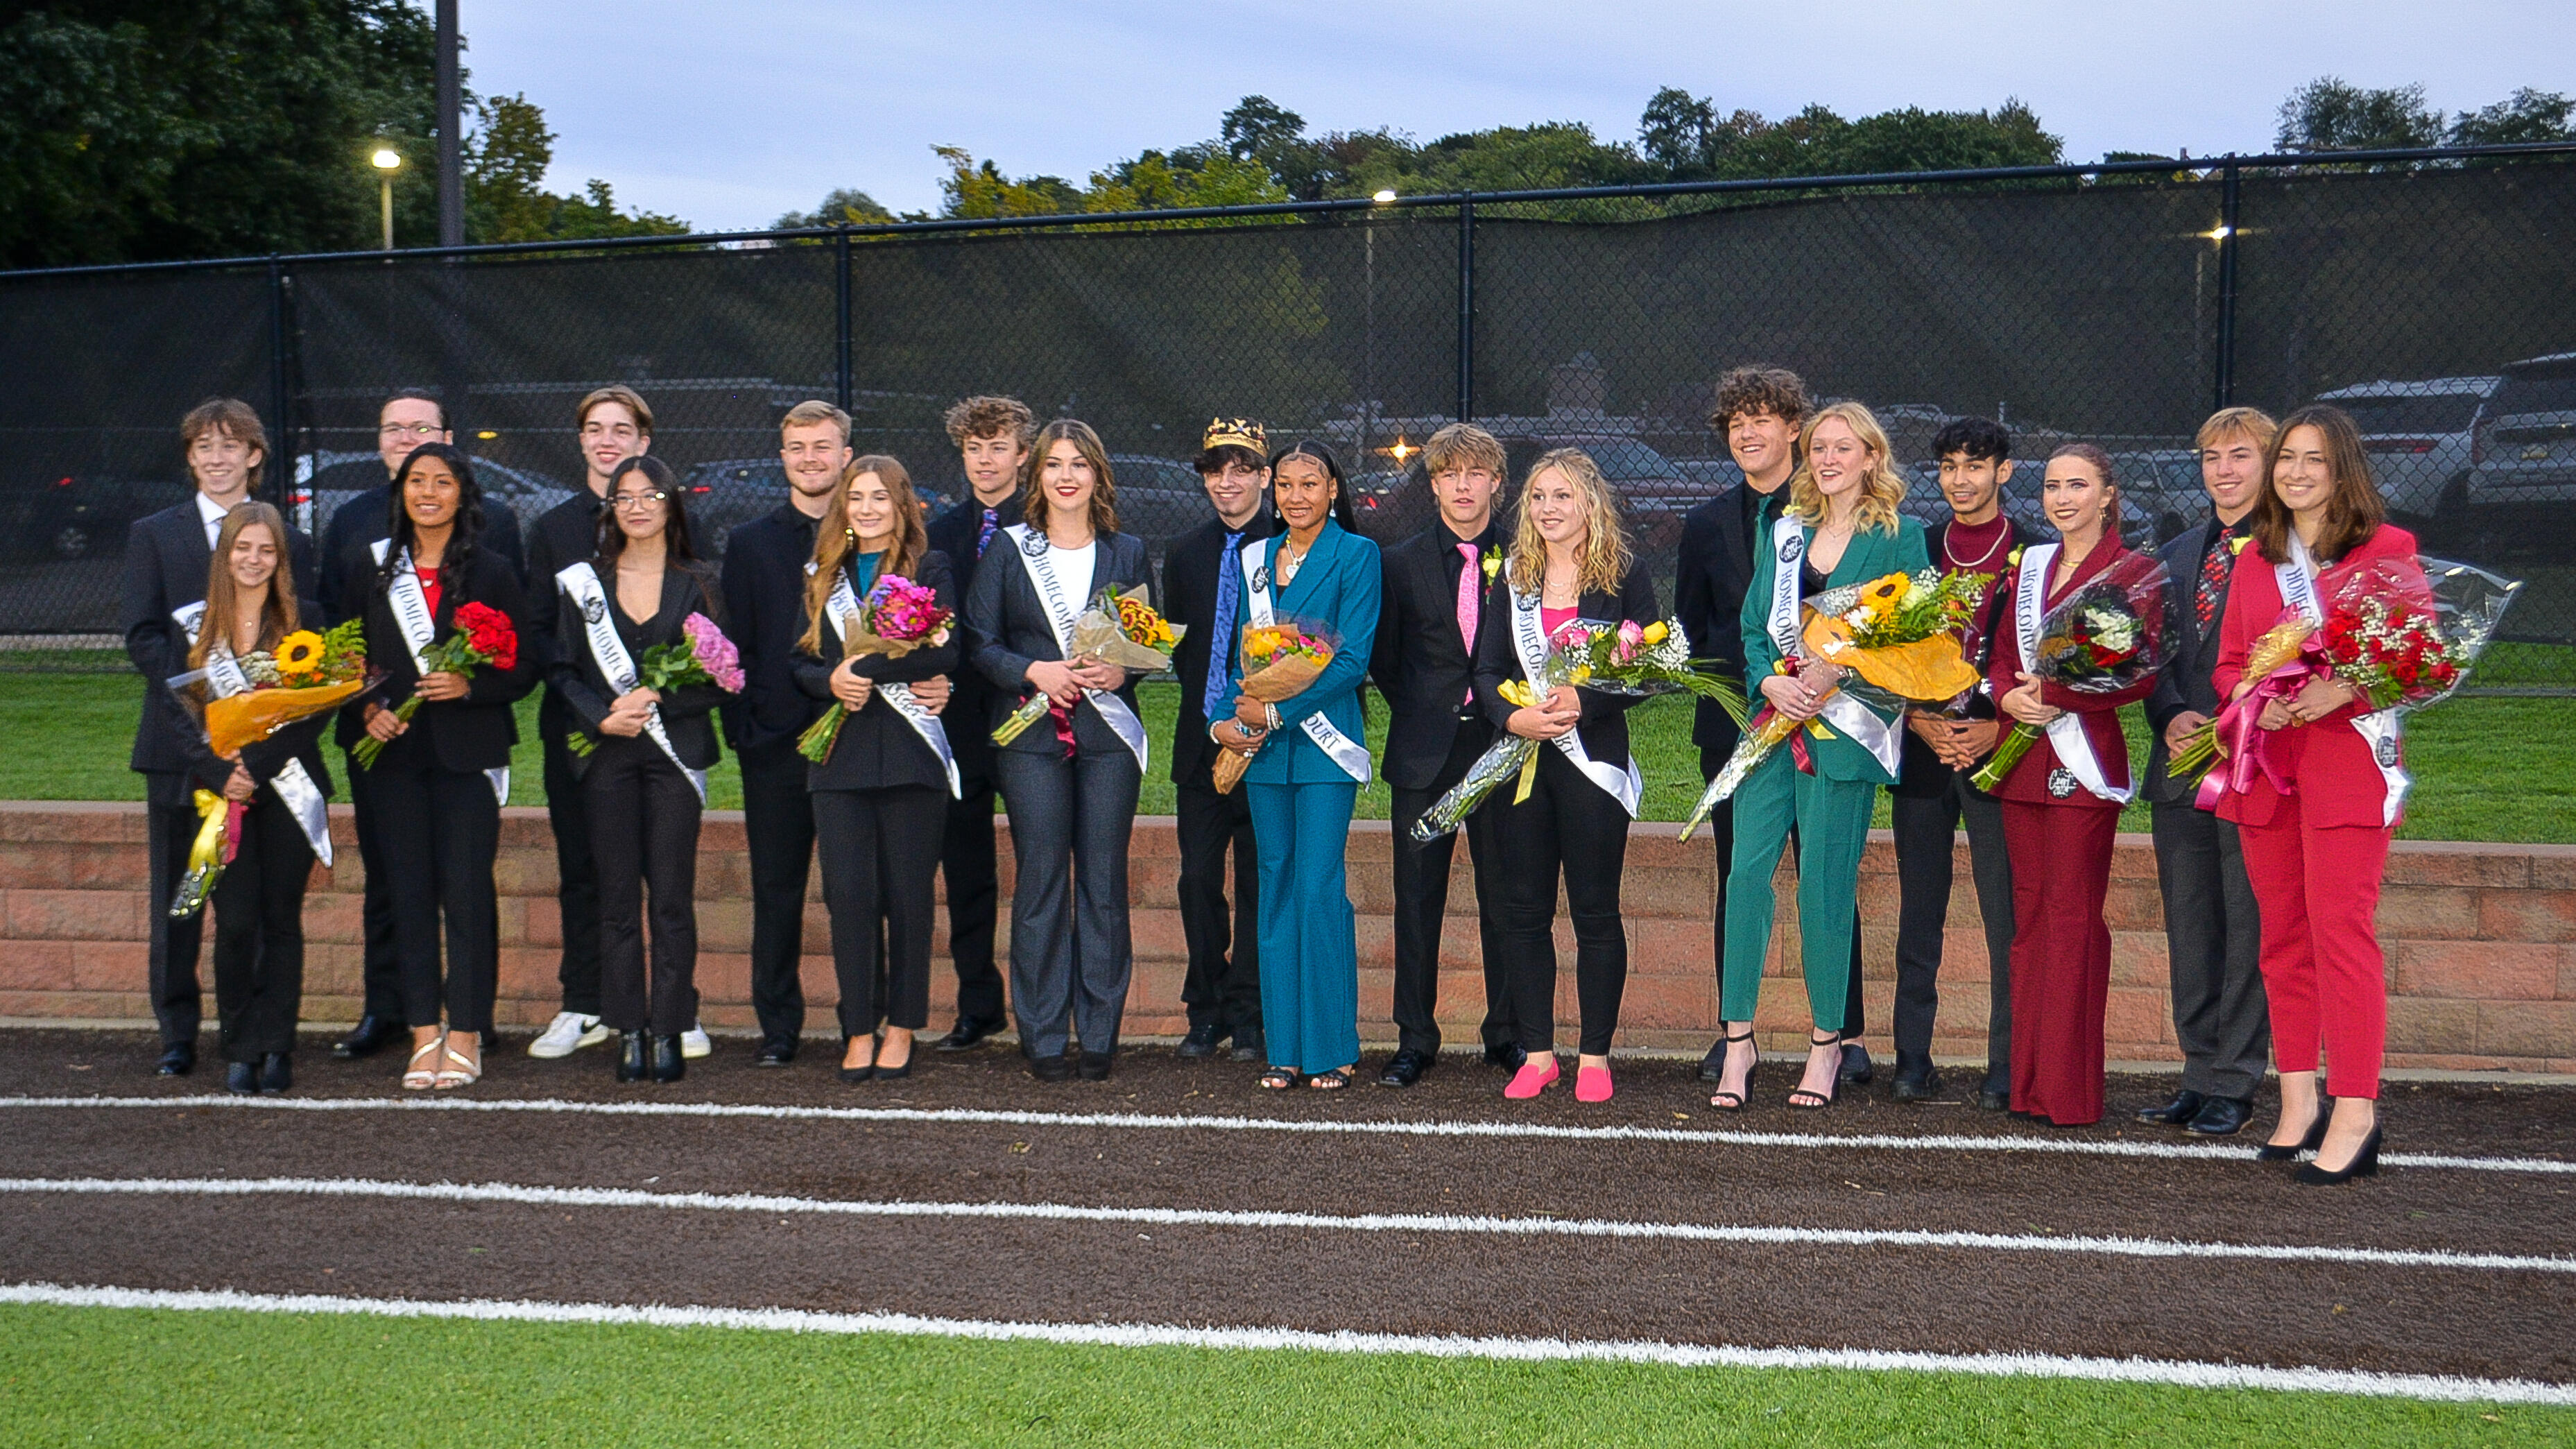 Congratulations to this year's Steel Valley Homecoming Court